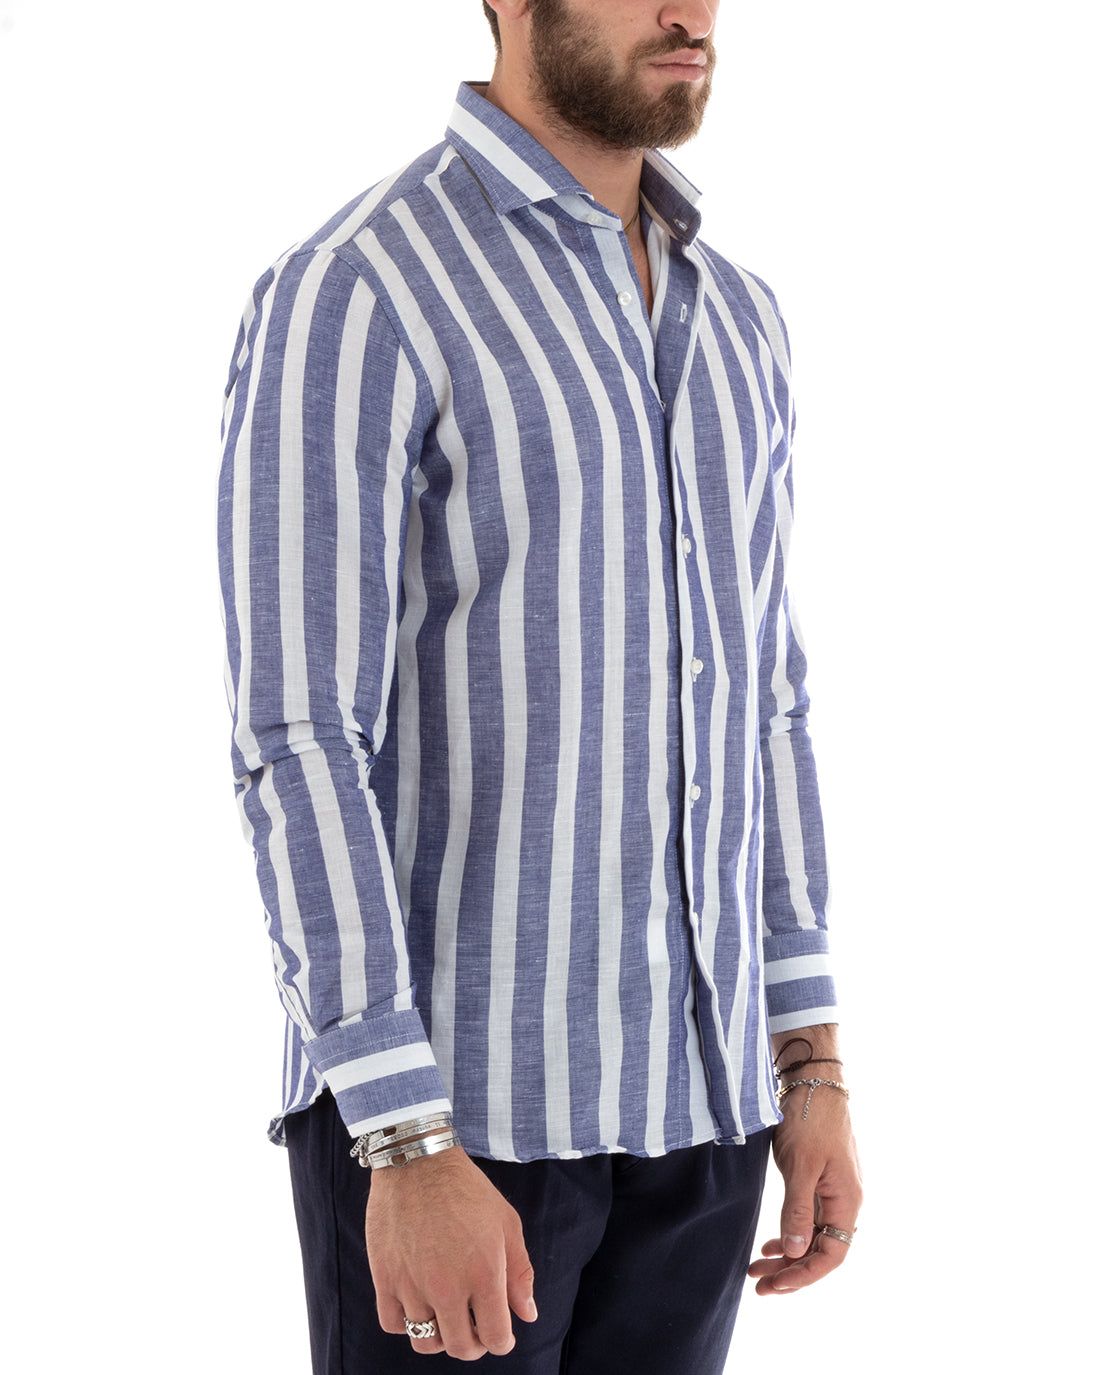 Men's Shirt With Tailored French Collar Long Sleeve Striped Linen Blue GIOSAL-C2687A